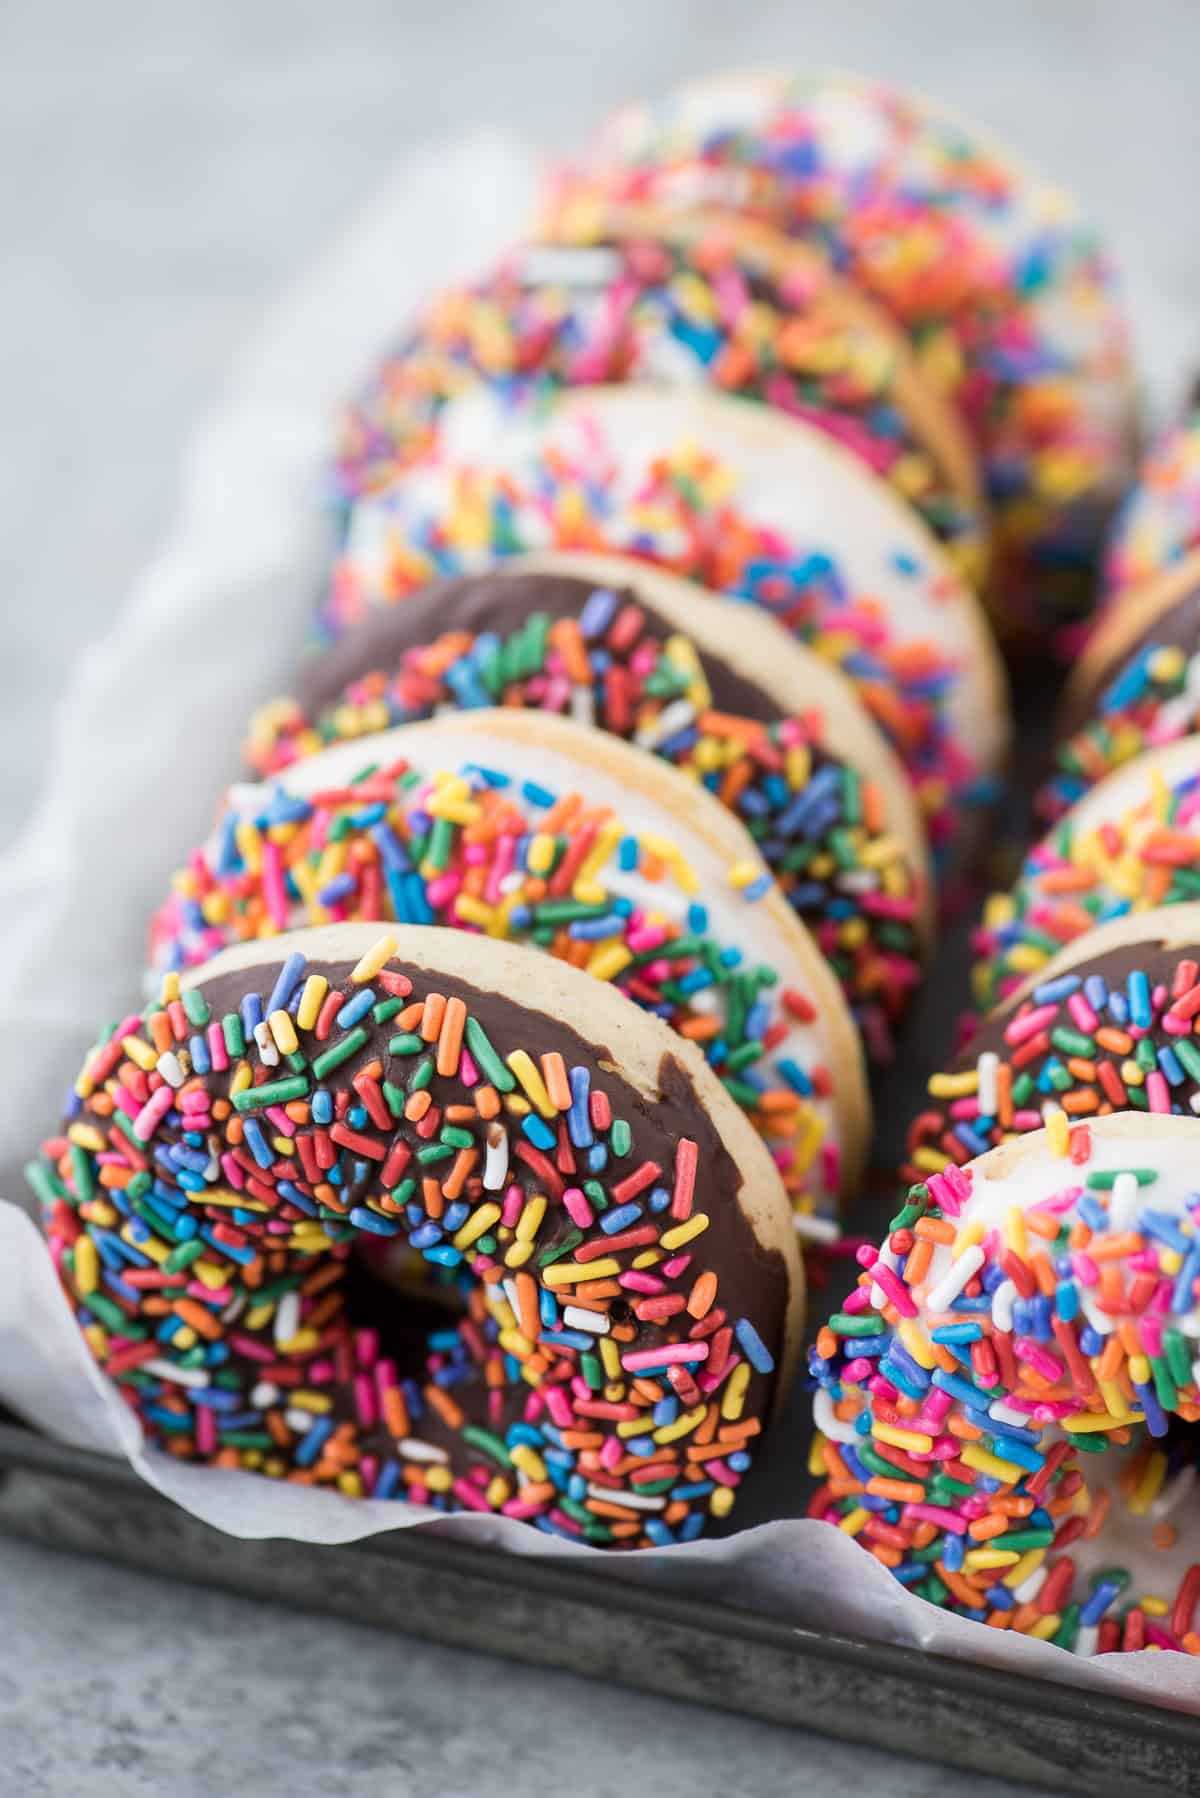 donuts with chocolate and white chocolate glaze with rainbow sprinkles lined up in metal pan